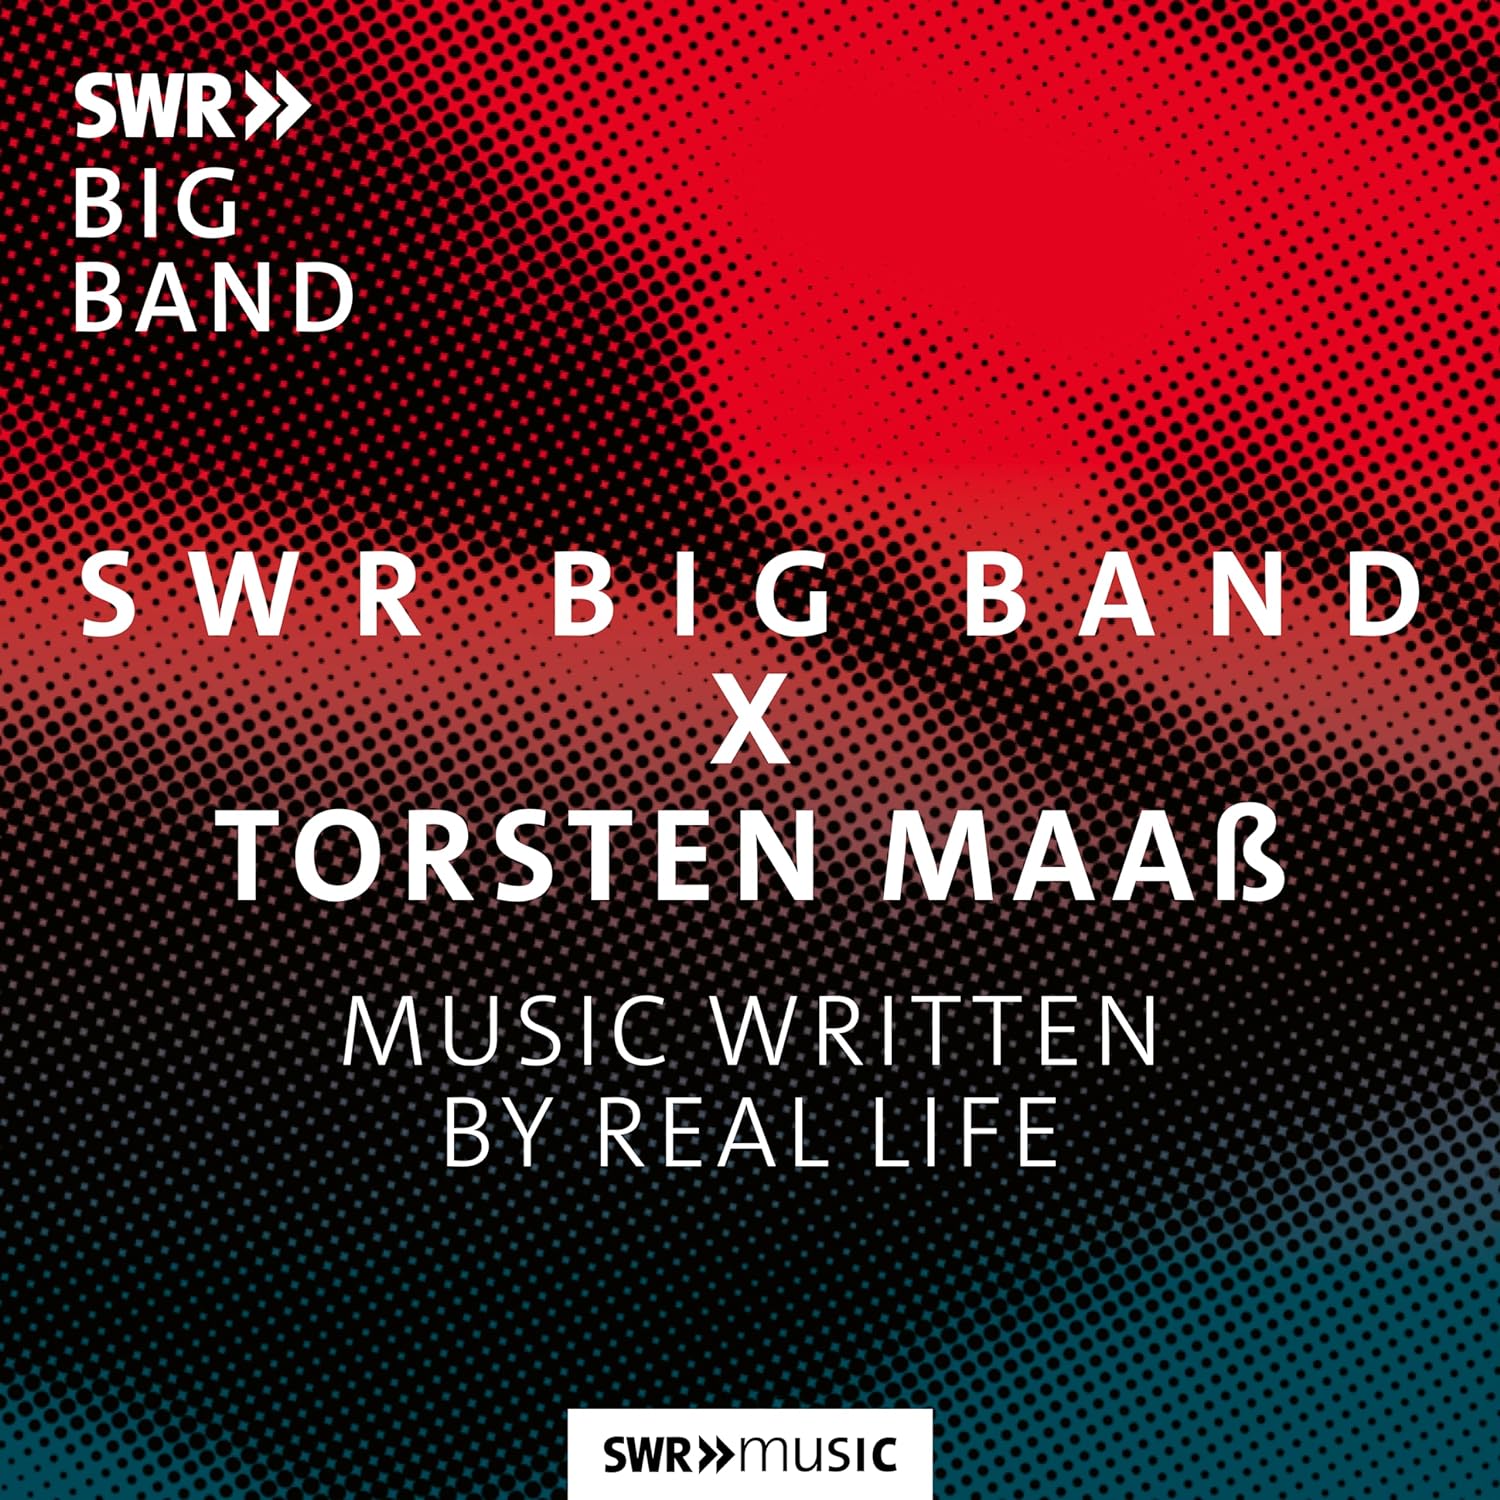 SWR BIG BAND - Swr Big Band X Torsten Maaß : Music Written By Real Life cover 